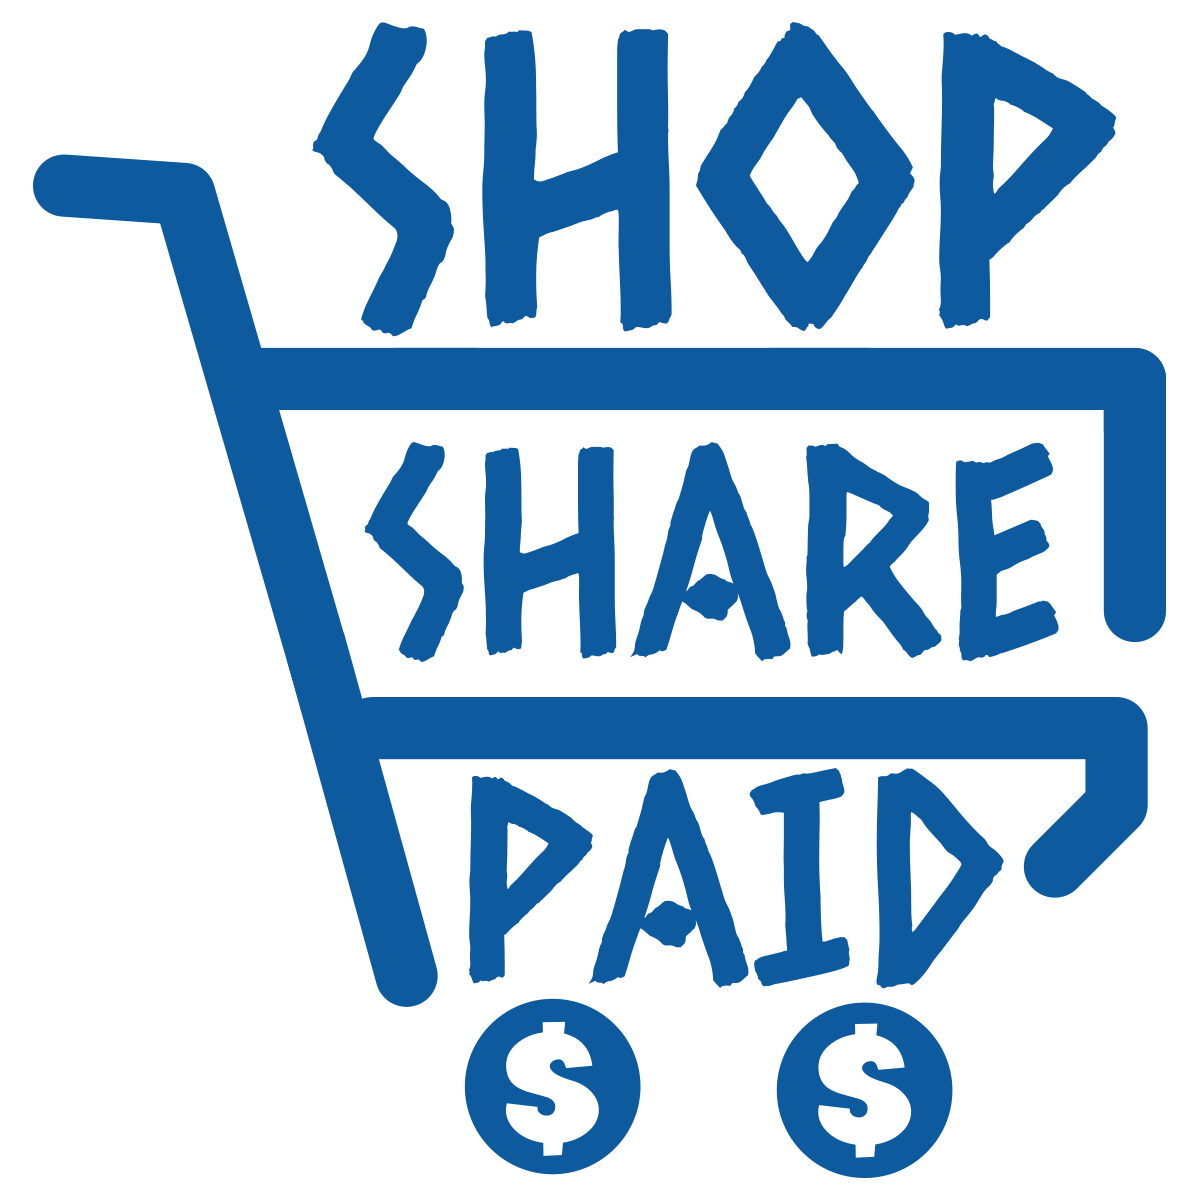 Shopping share. Share pay